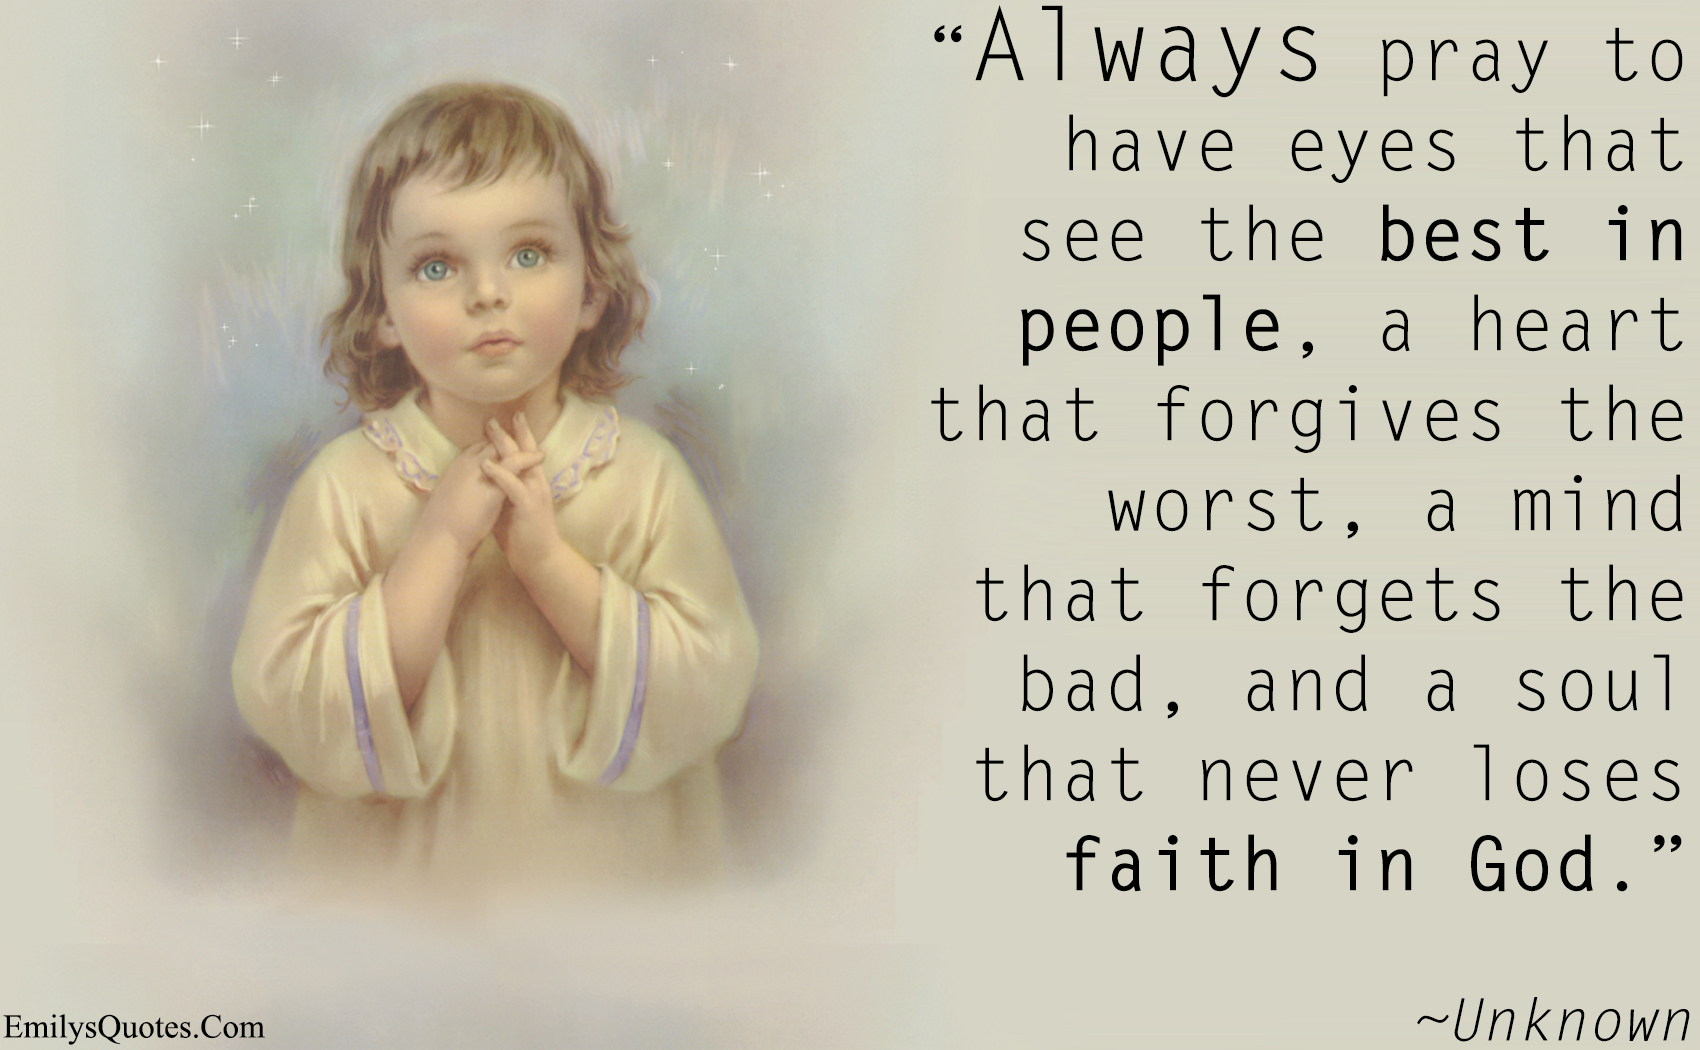 Always pray to have eyes that see the best in people, a heart that forgives the worst, a mind that forgets the bad, and a soul that never loses faith in God